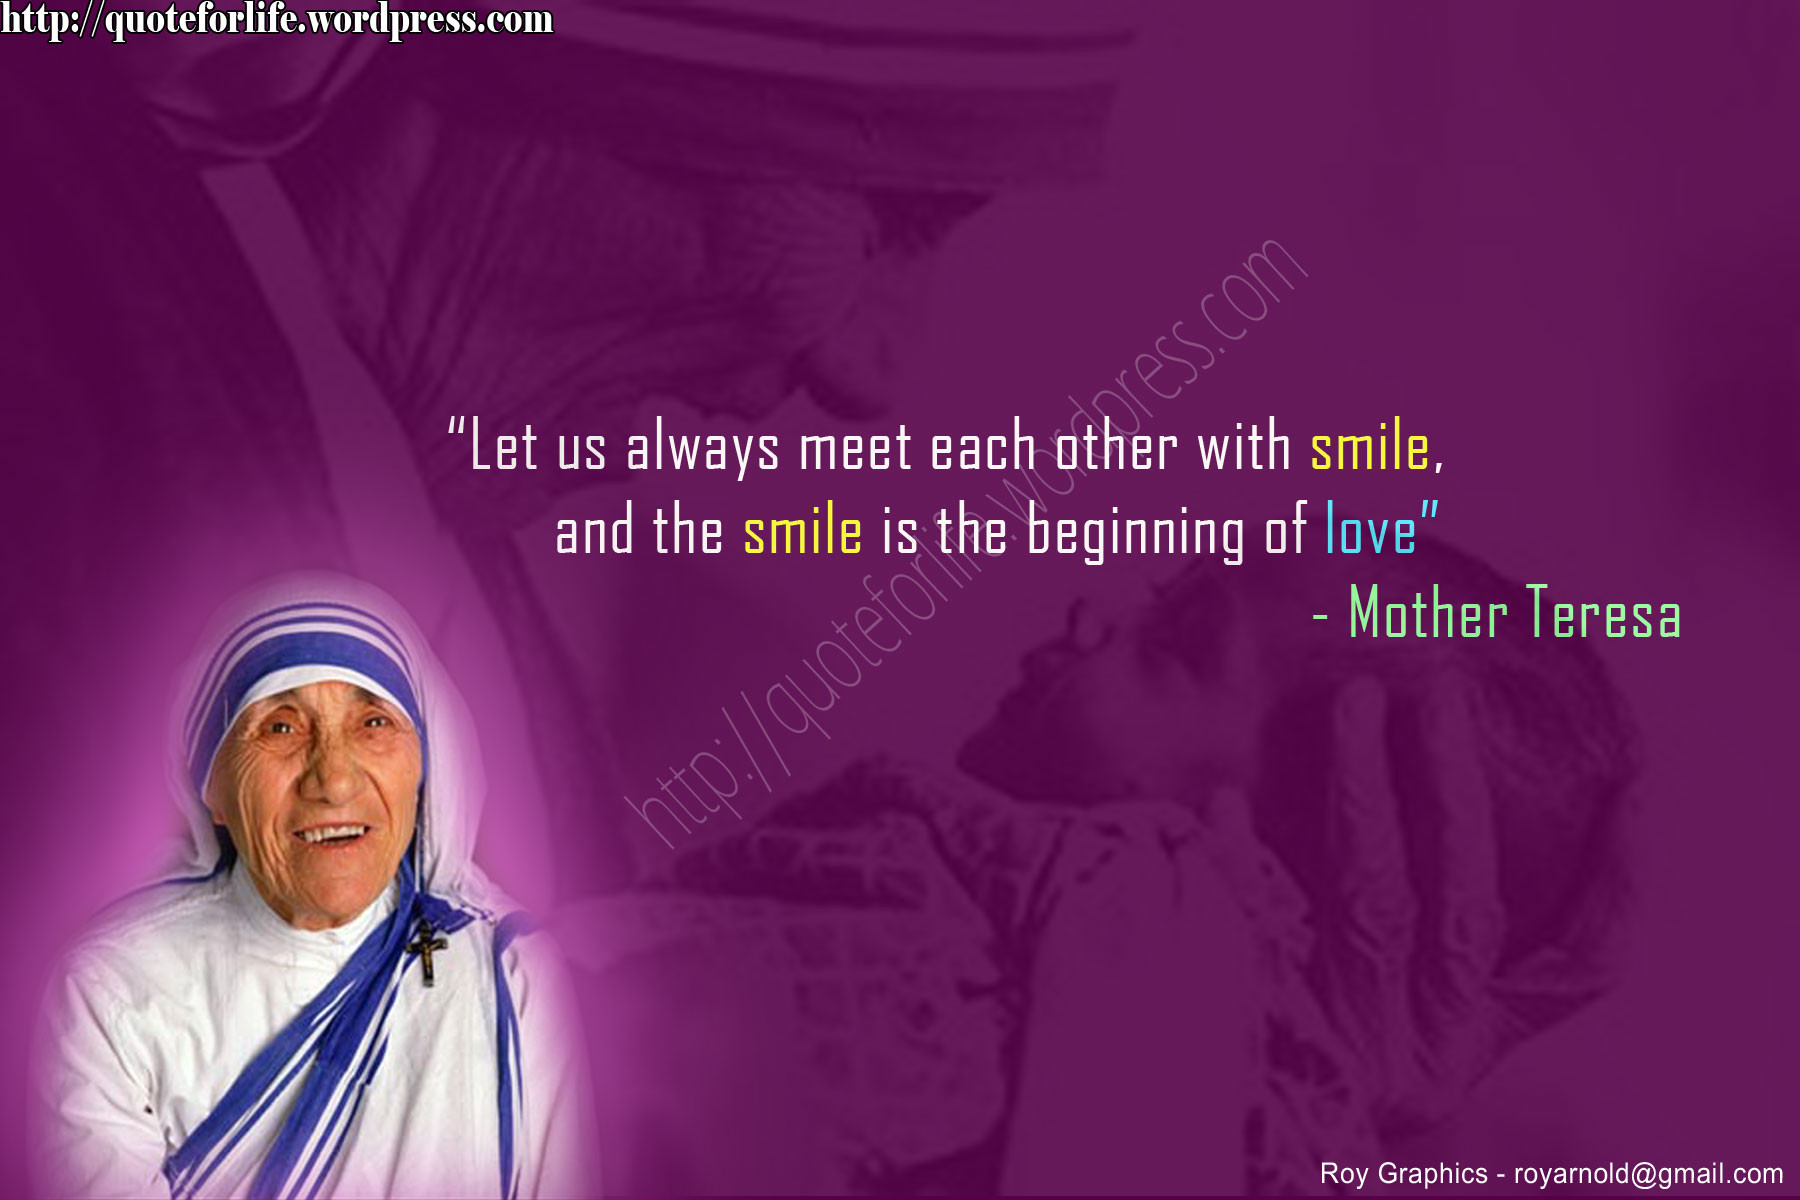 Mother Teresa Smile Quote
 Love